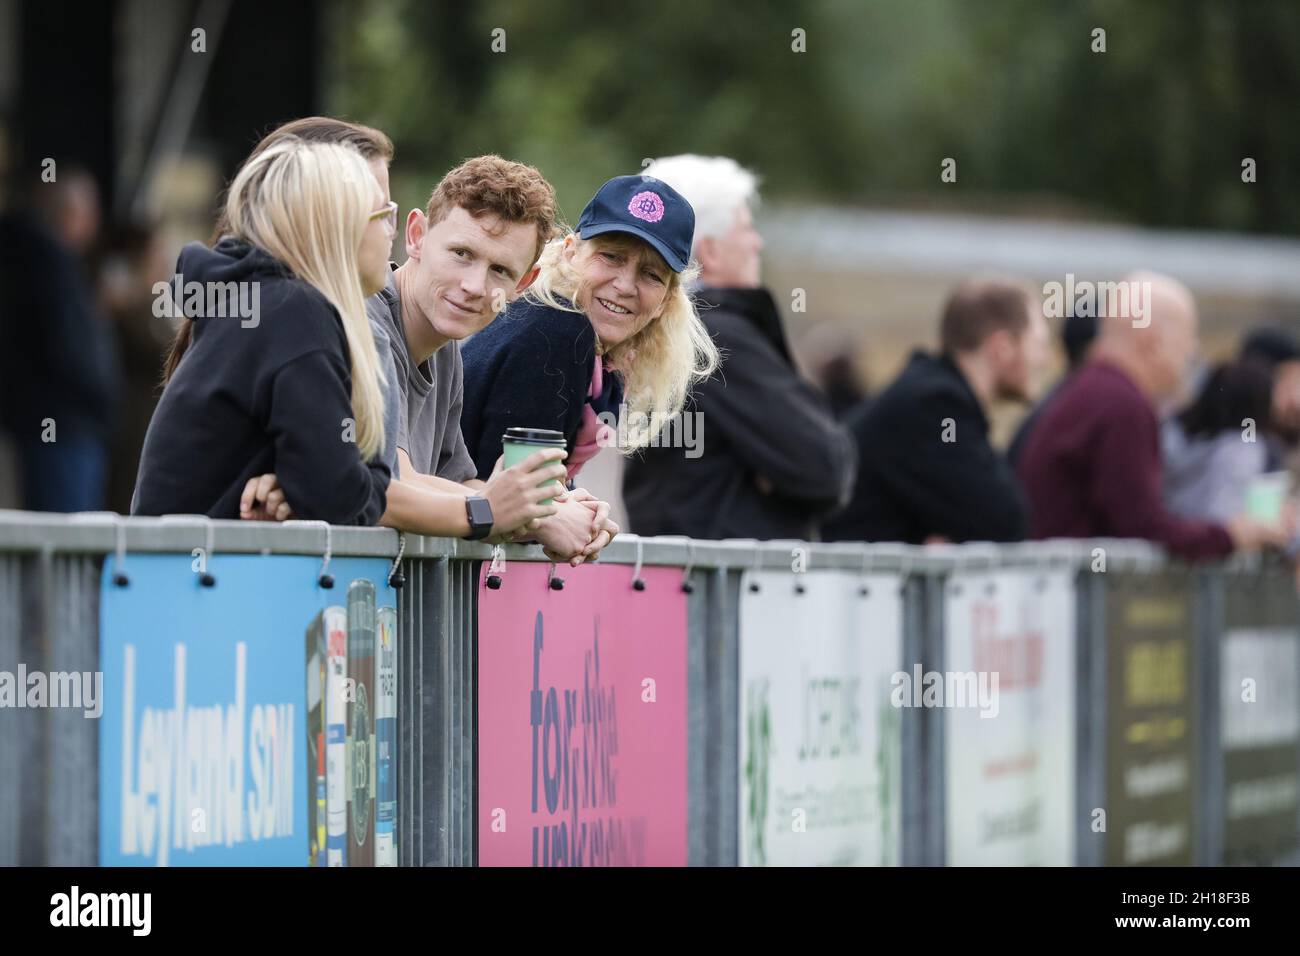 London, UK. 17th Oct, 2021. London, England, October 17th 20 Dulwich Hamlet fans at the London and South East Regional Womens Premier game between Dulwich Hamlet and Ashford at Champion Hill in London, England. Liam Asman/SPP Credit: SPP Sport Press Photo. /Alamy Live News Stock Photo